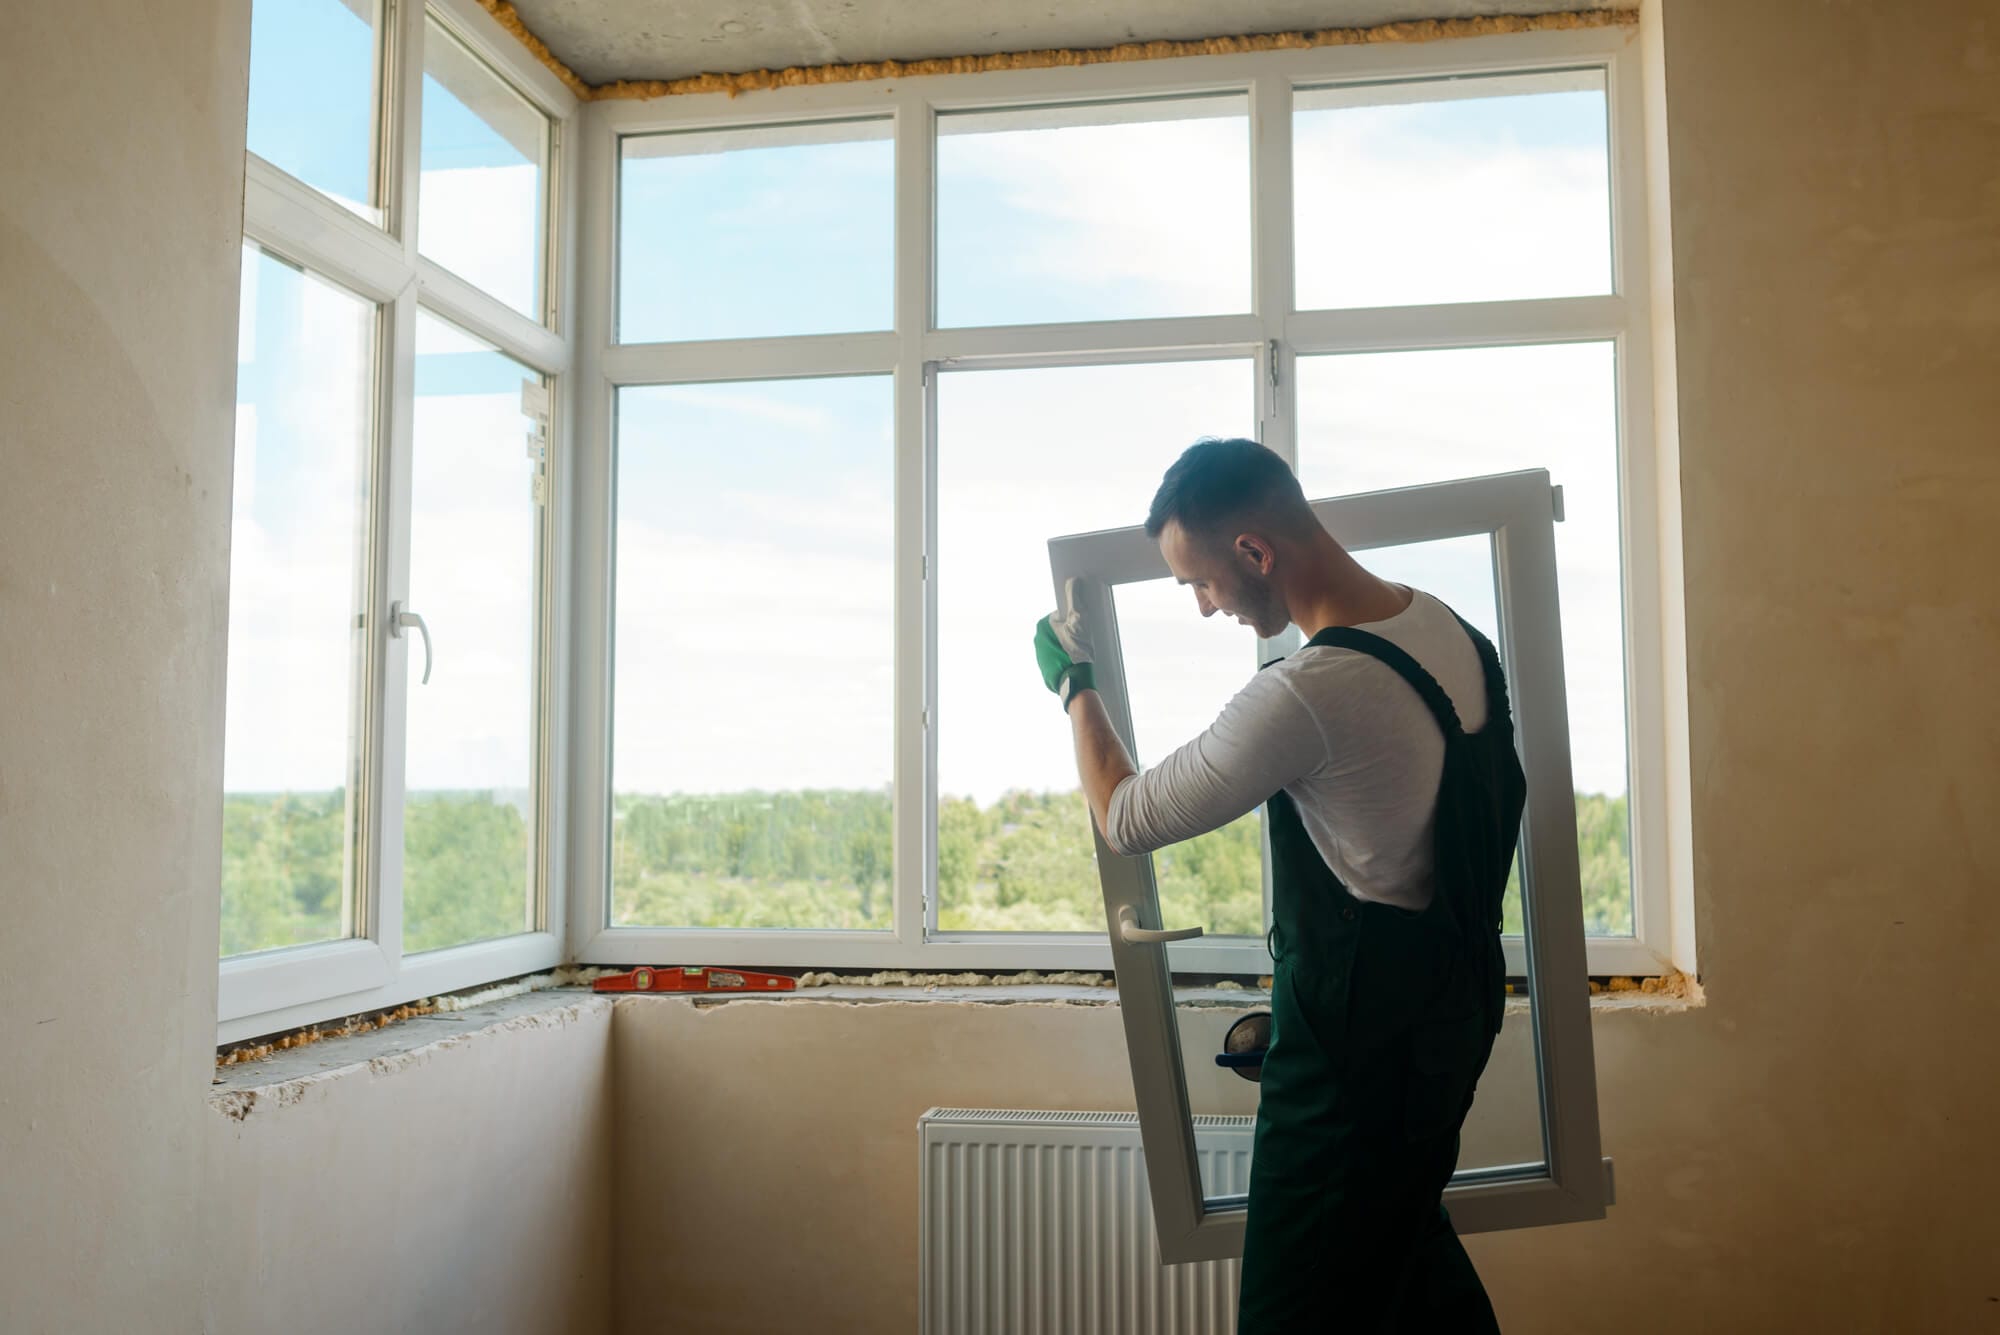 A technician holding a large window sash next to windows